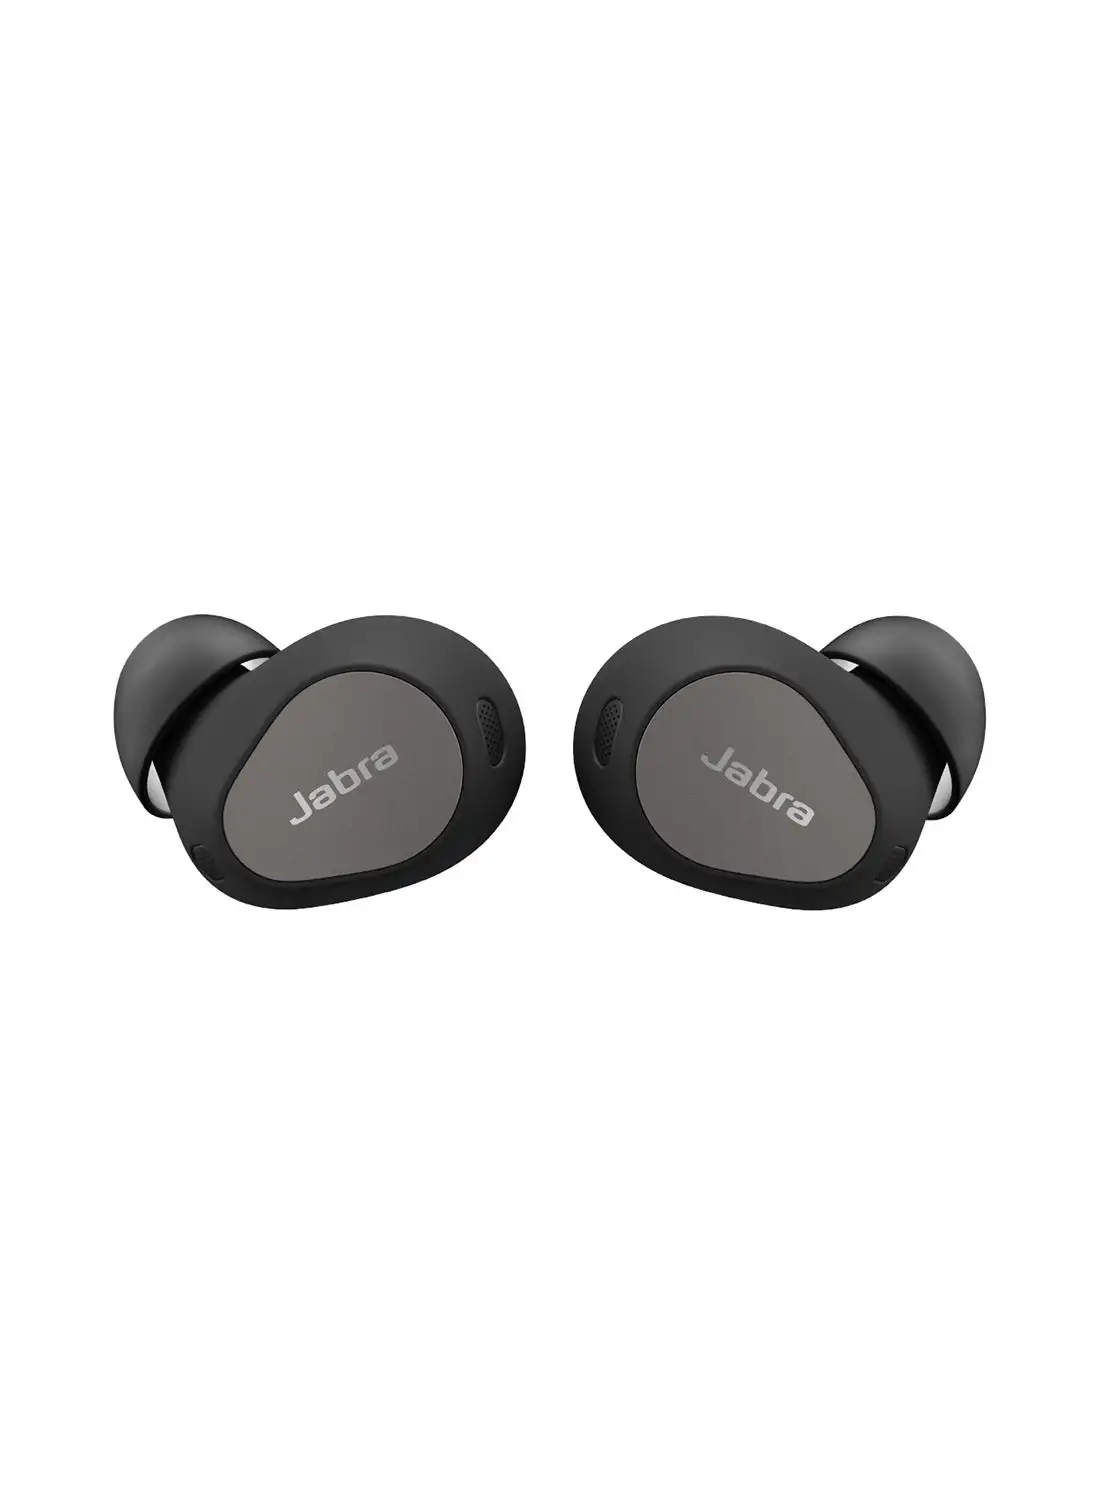 Jabra Elite 10 True – Advanced Active Noise Cancelling Earbuds With Next-Level Dolby Atmos Surround Sound –All-Day Comfort, Multipoint Bluetooth, Wireless Charging Titanium Black